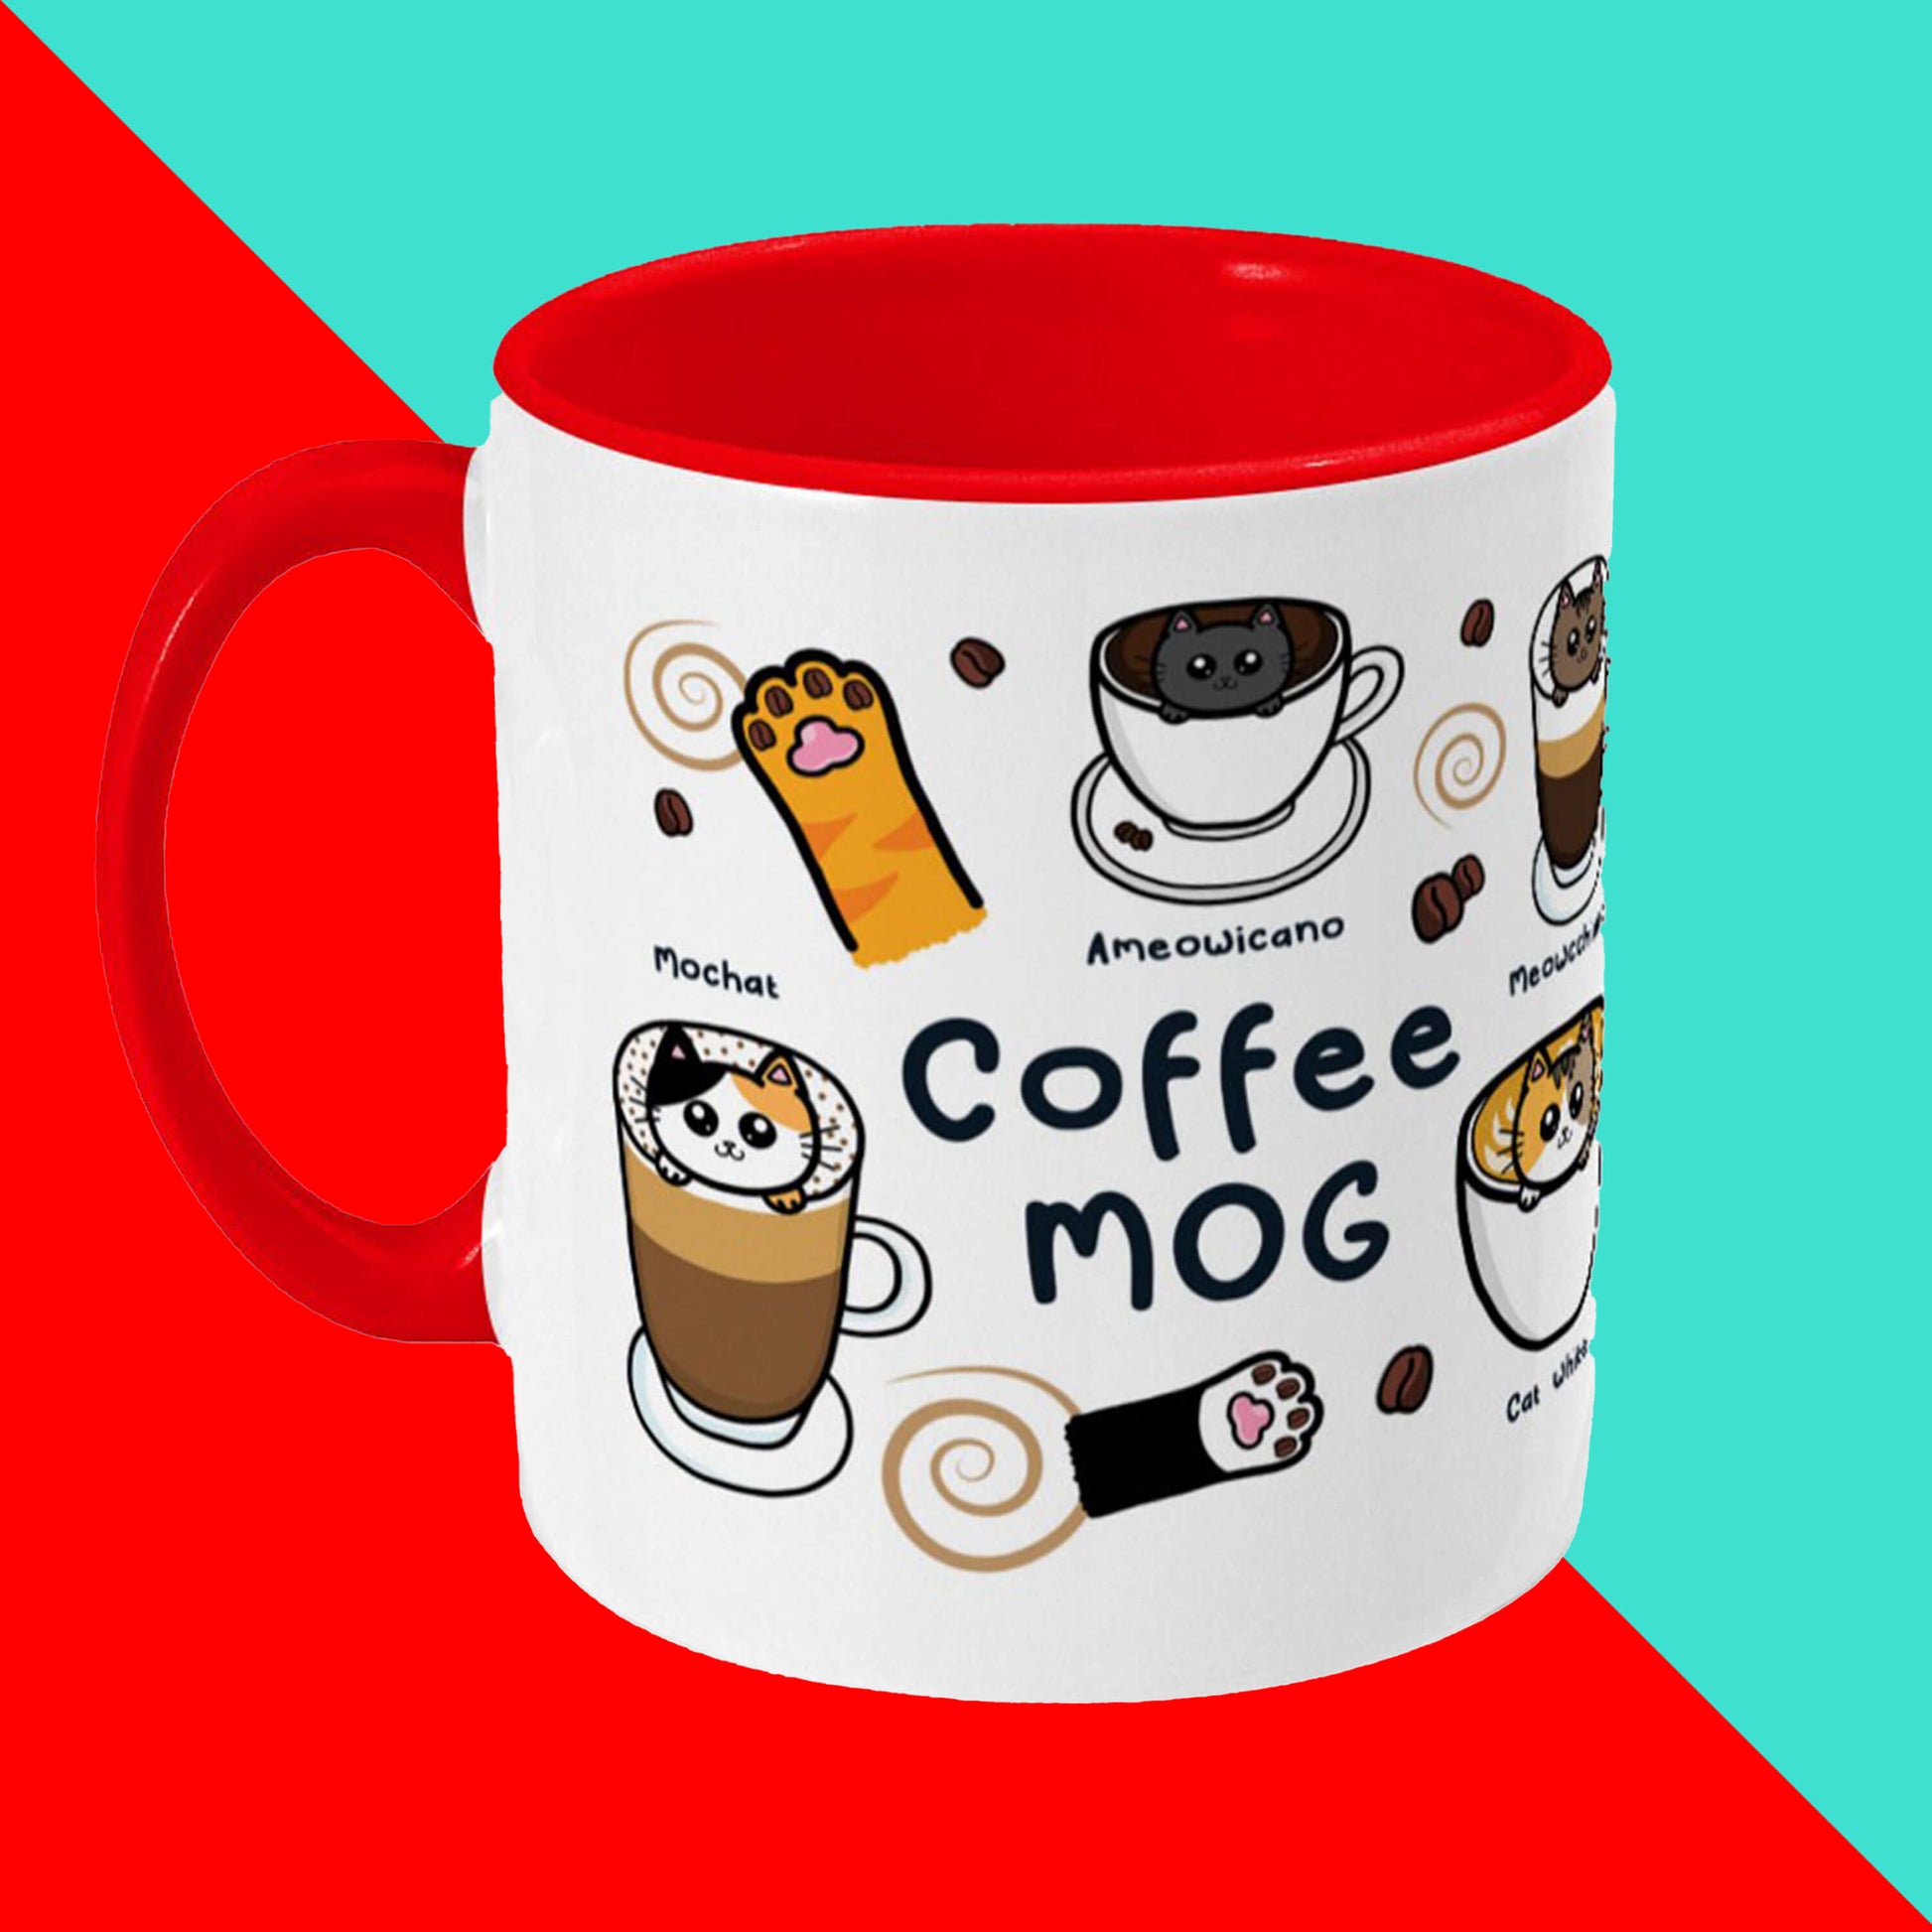 The Coffee Mog Cat Mug on a red and blue background. The cat themed white coffee mug with red inner and handle is facing right to show black text reading 'coffee mog' and illustrations of cat paw toe coffee beans, mochat (tortoiseshell cat inside a mocha), ameowicano (black cat in a black coffee), coffee beans and brown swirls.